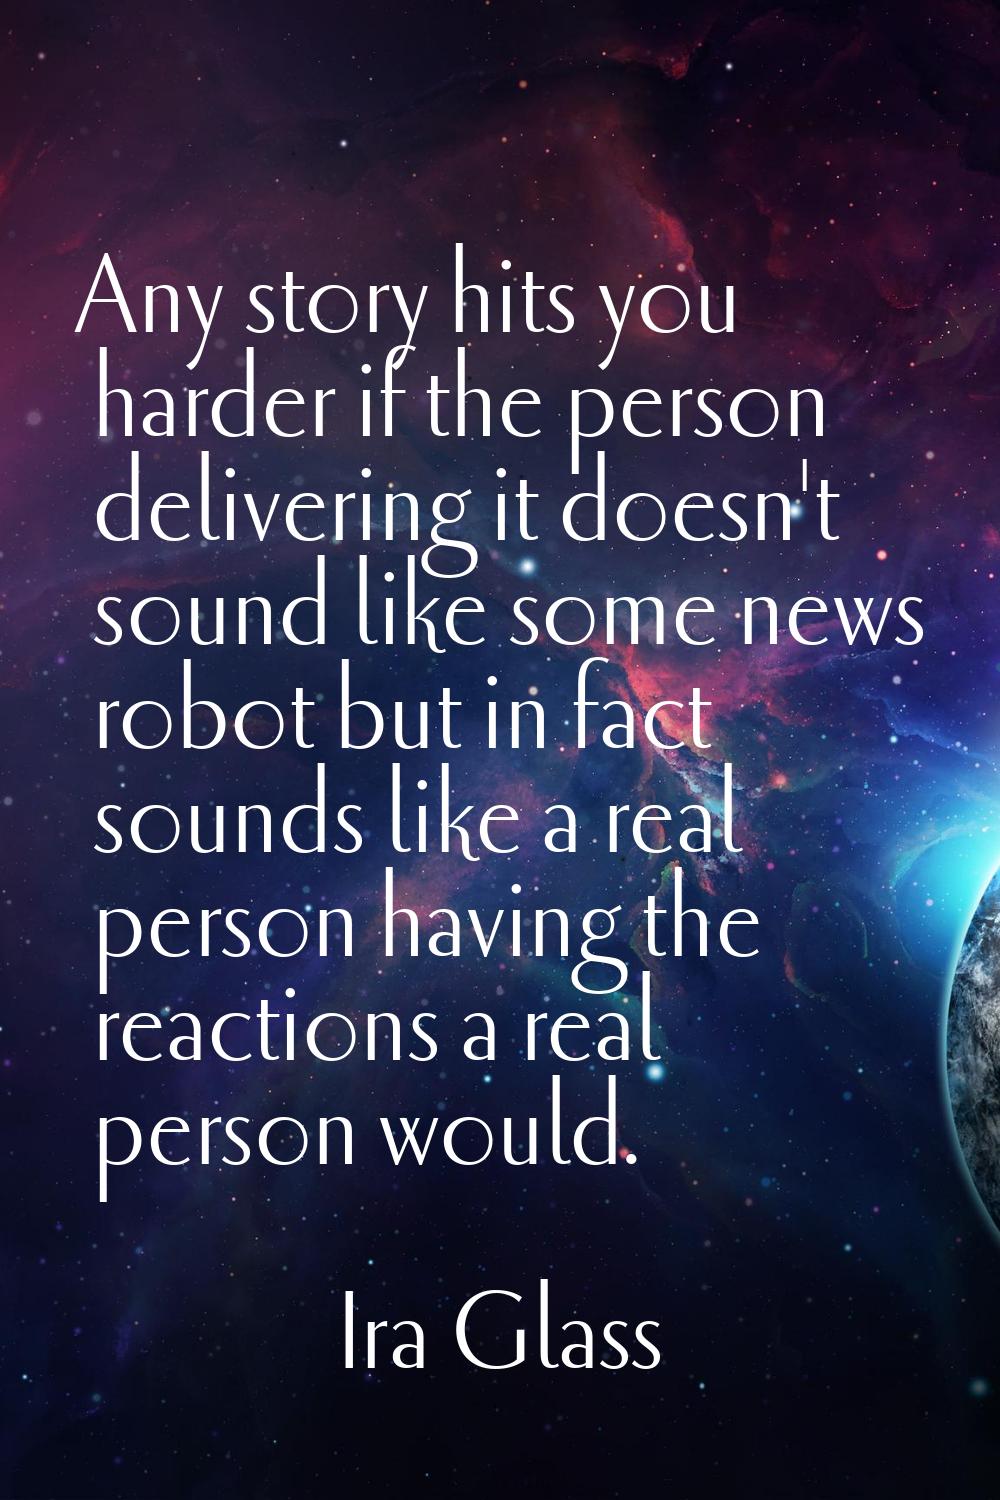 Any story hits you harder if the person delivering it doesn't sound like some news robot but in fac